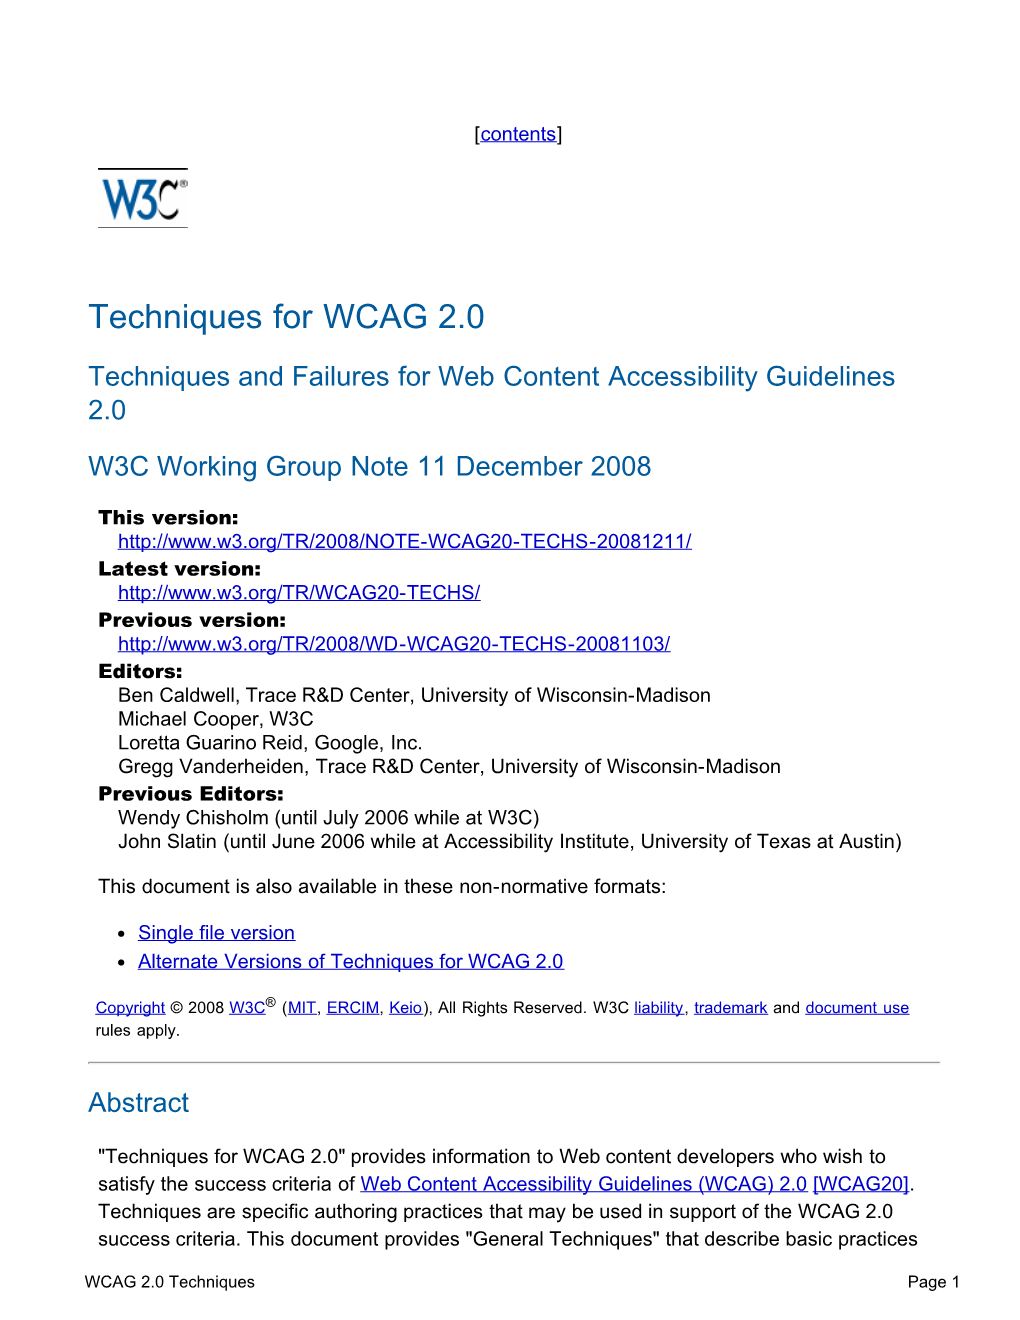 Techniques for WCAG 2.0